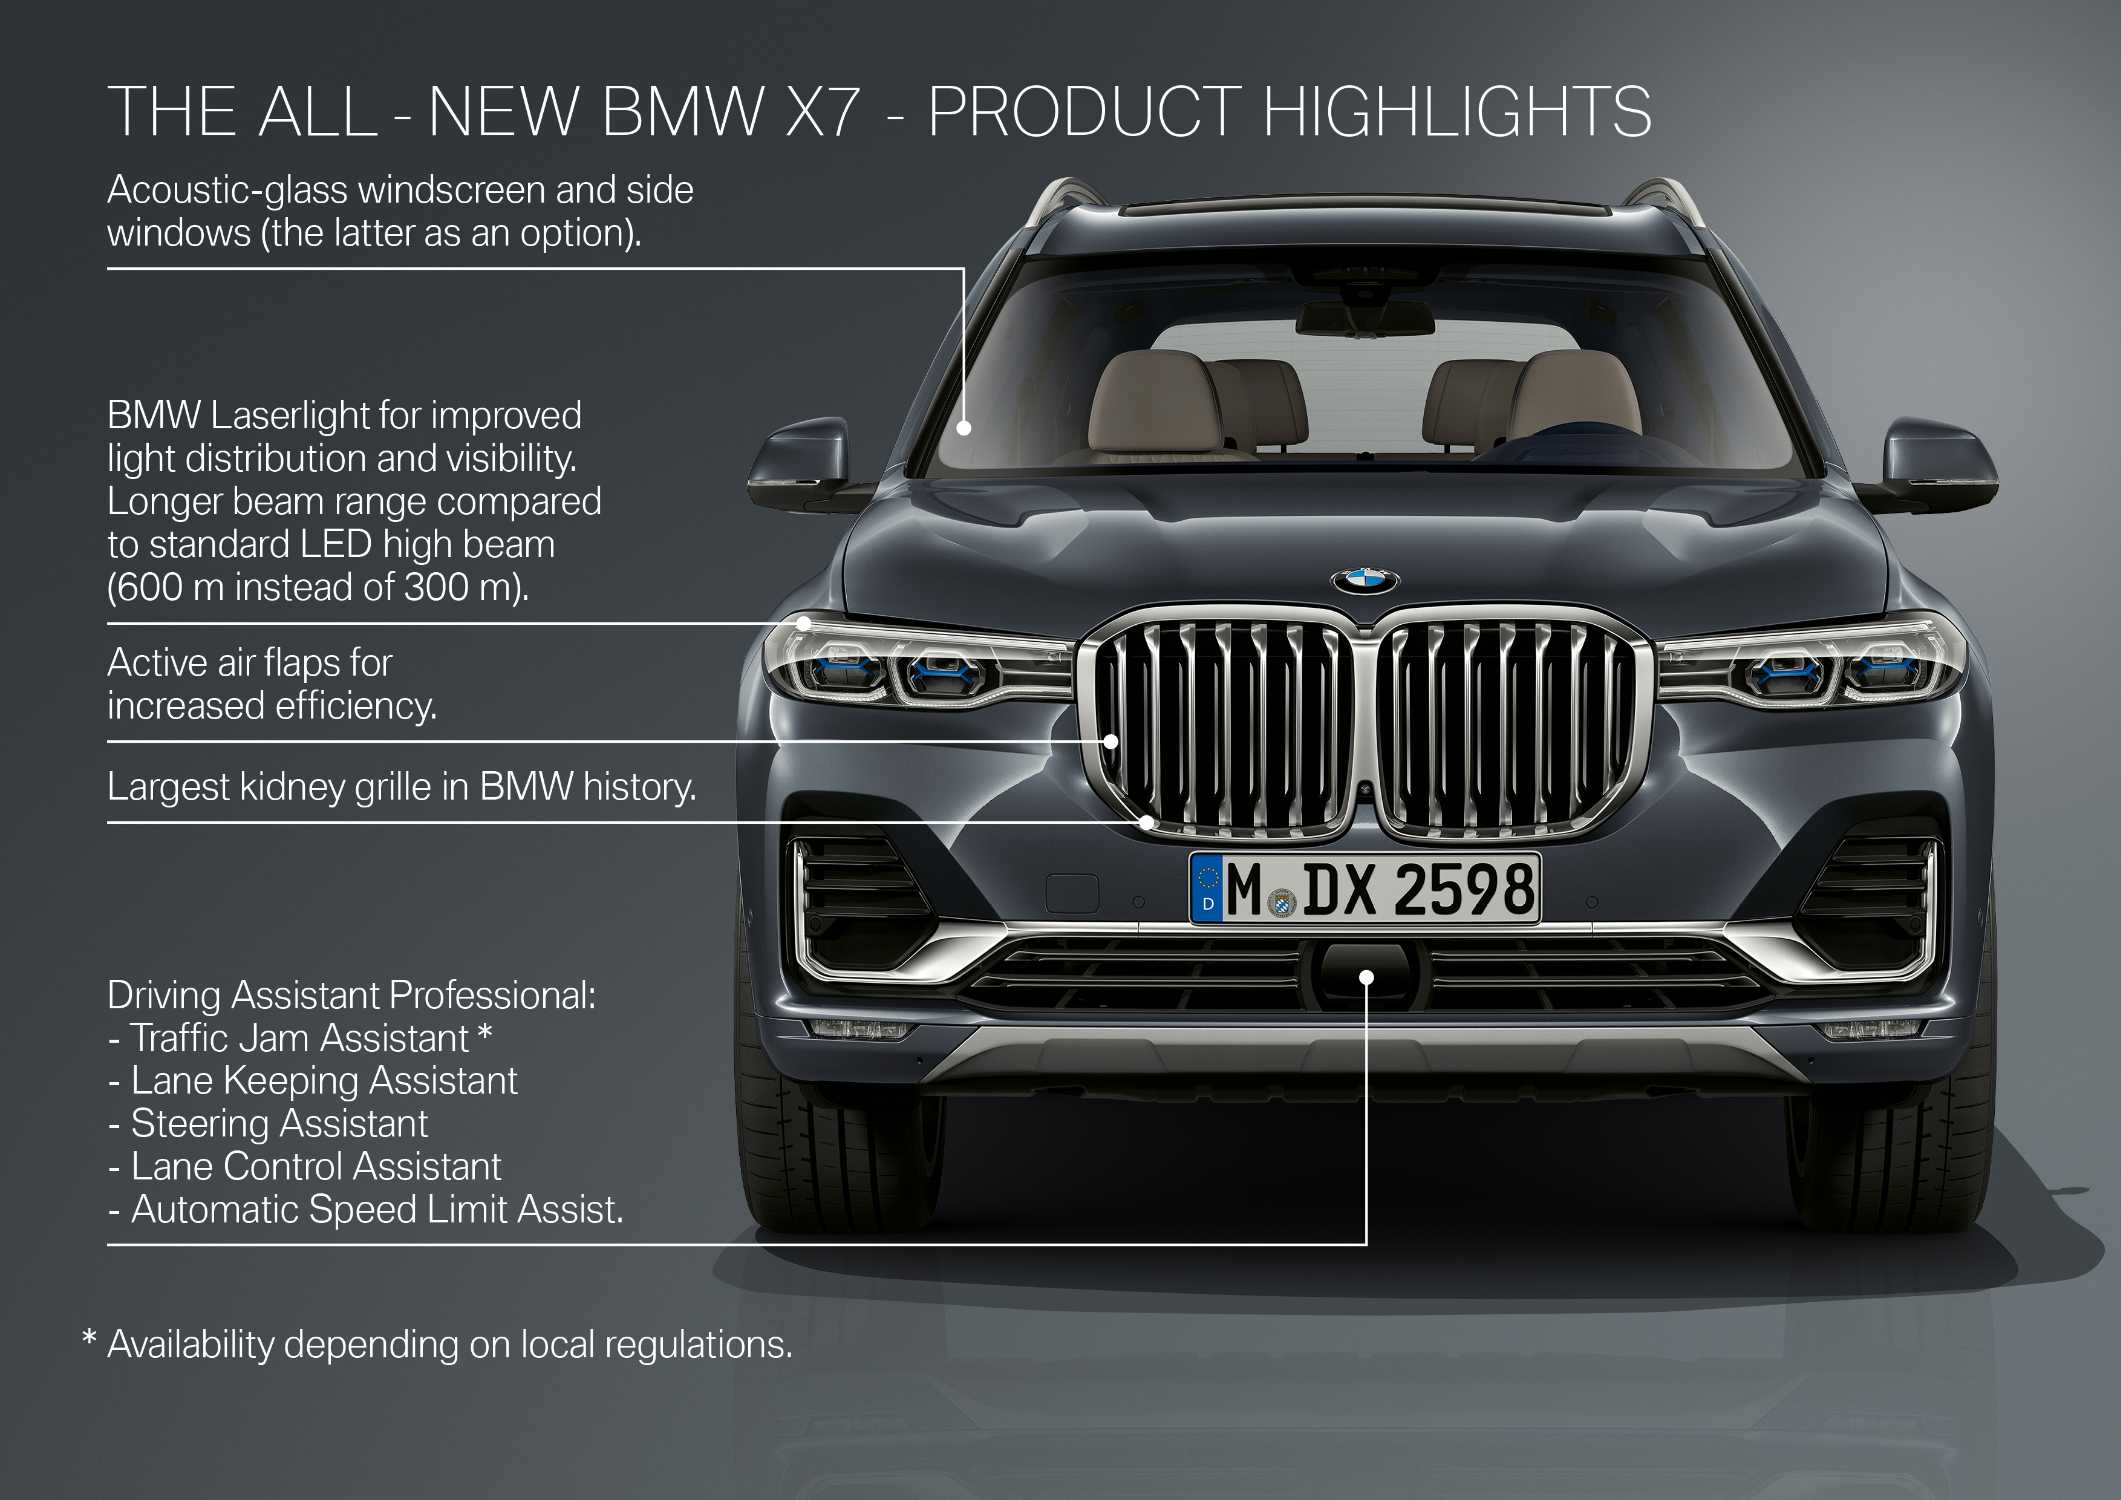 The first-ever BMW X7 - Product highlights (10/2018).